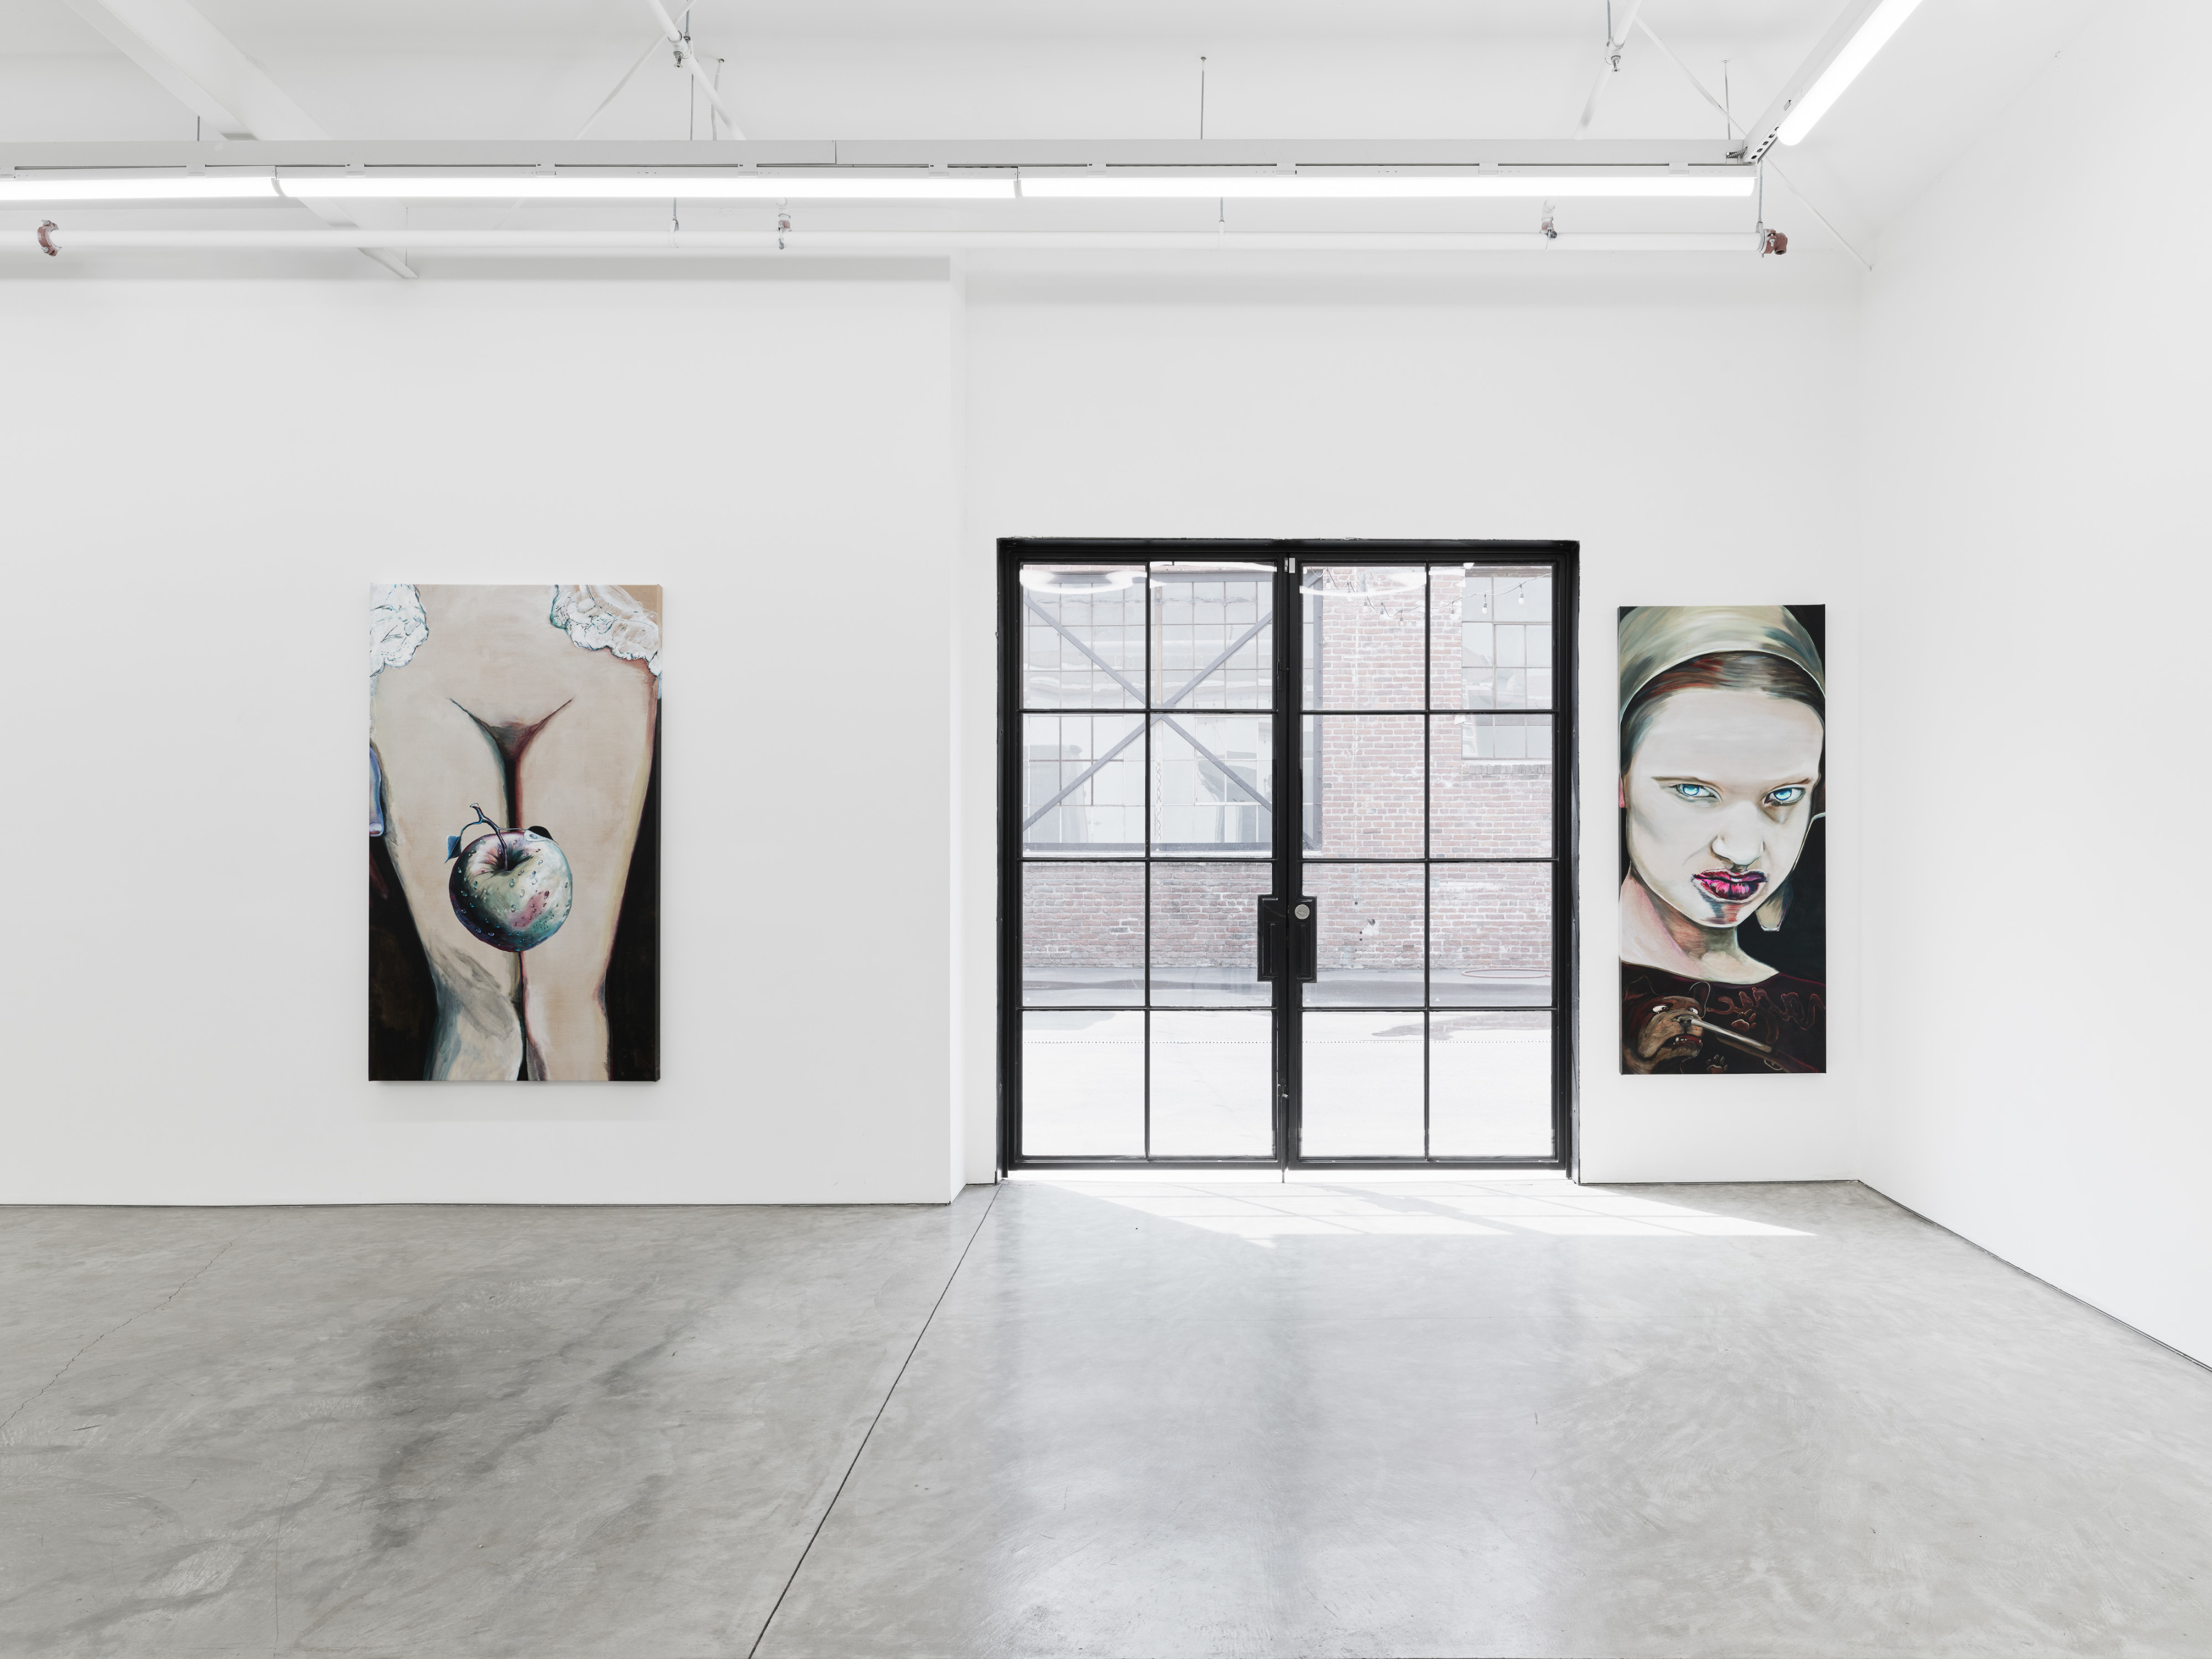 Installation view of Connor Marie Stankard's exhibition "Love Apple" at Night Gallery